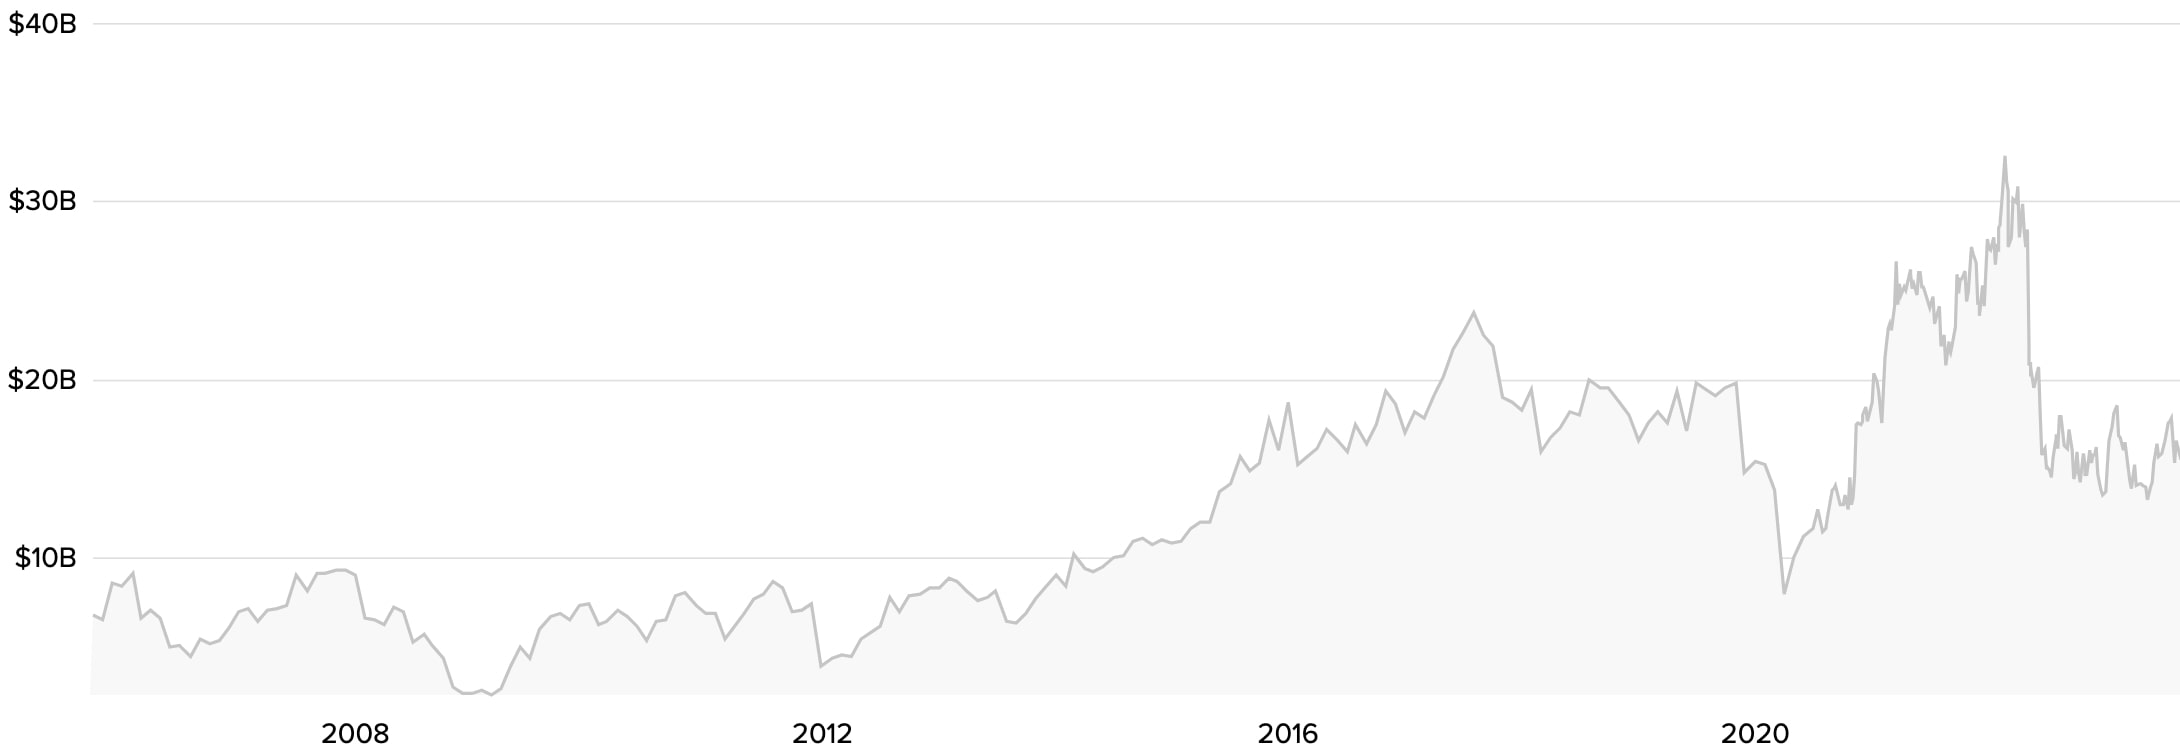 The market capitalization history of Expedia Group